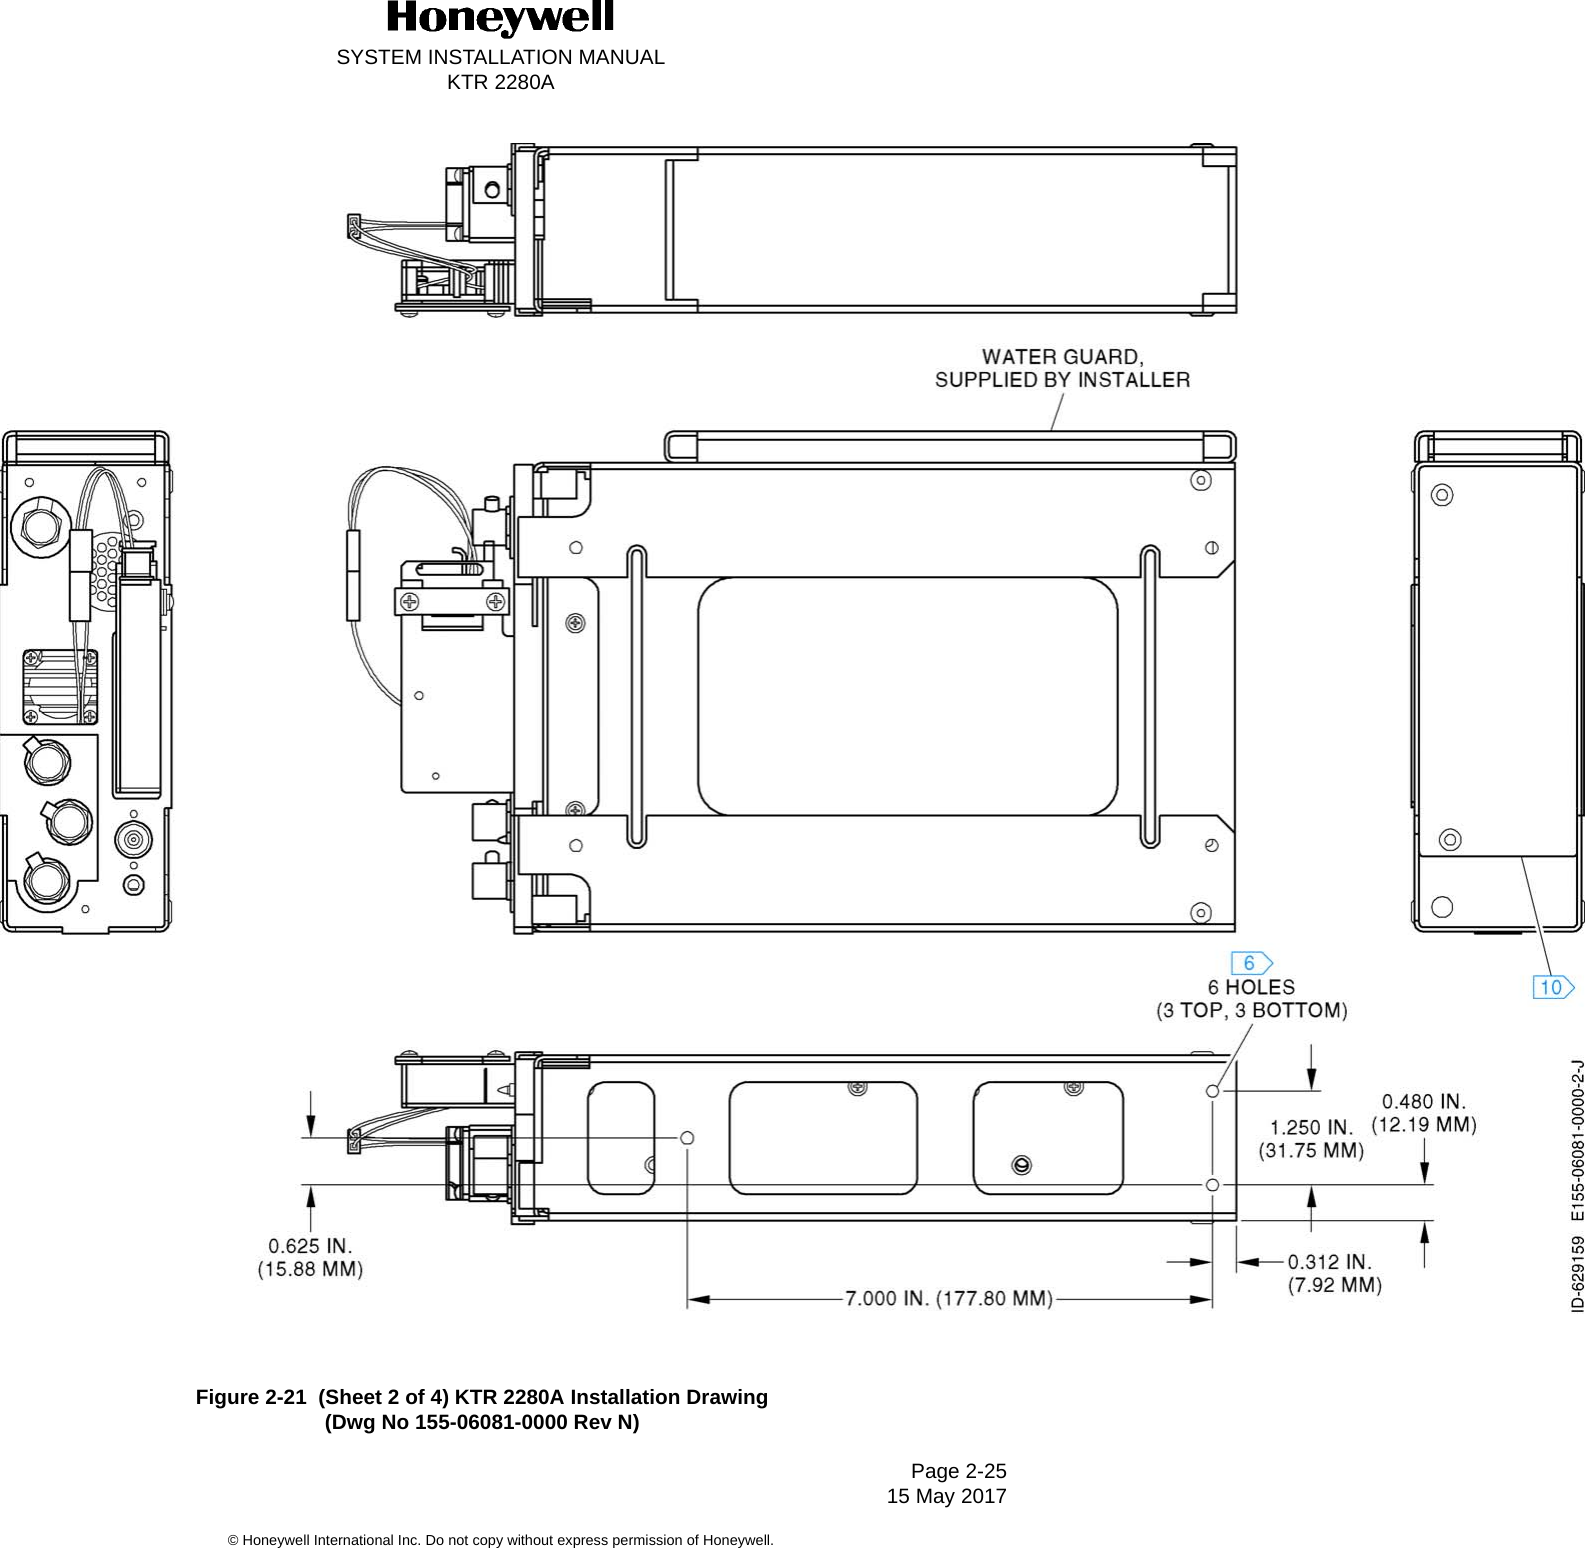 SYSTEM INSTALLATION MANUALKTR 2280APage 2-25 15 May 2017© Honeywell International Inc. Do not copy without express permission of Honeywell.Figure 2-21  (Sheet 2 of 4) KTR 2280A Installation Drawing(Dwg No 155-06081-0000 Rev N)